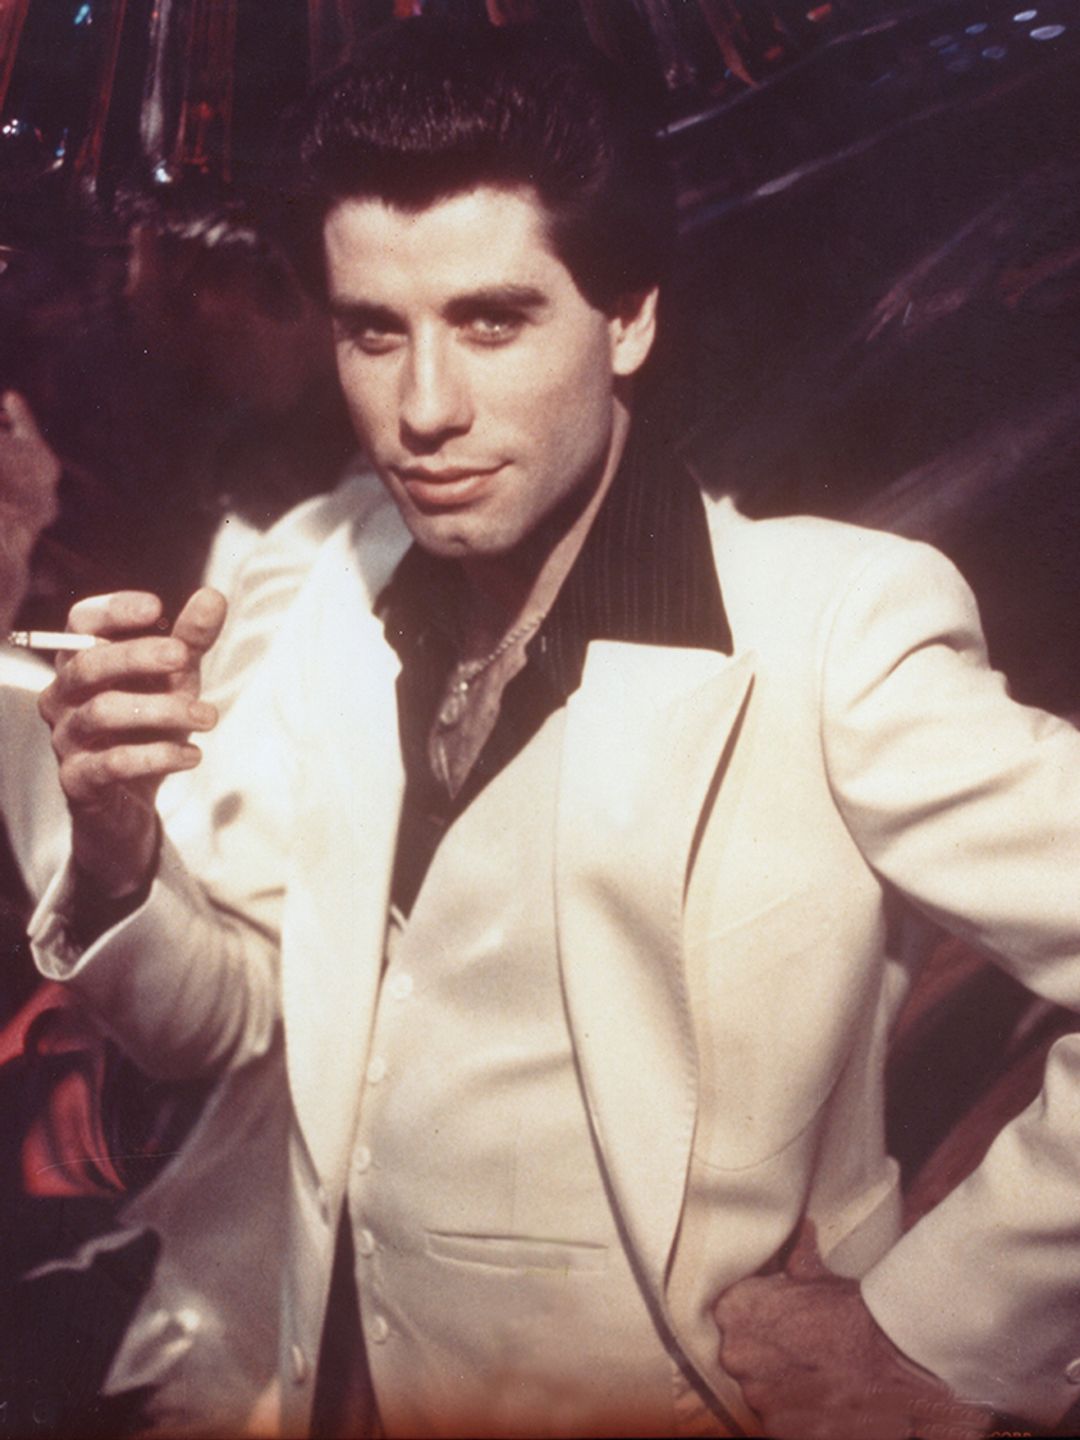 John bagged an Academy Award nomination after starring as Tony Manero in Saturday Night Fever